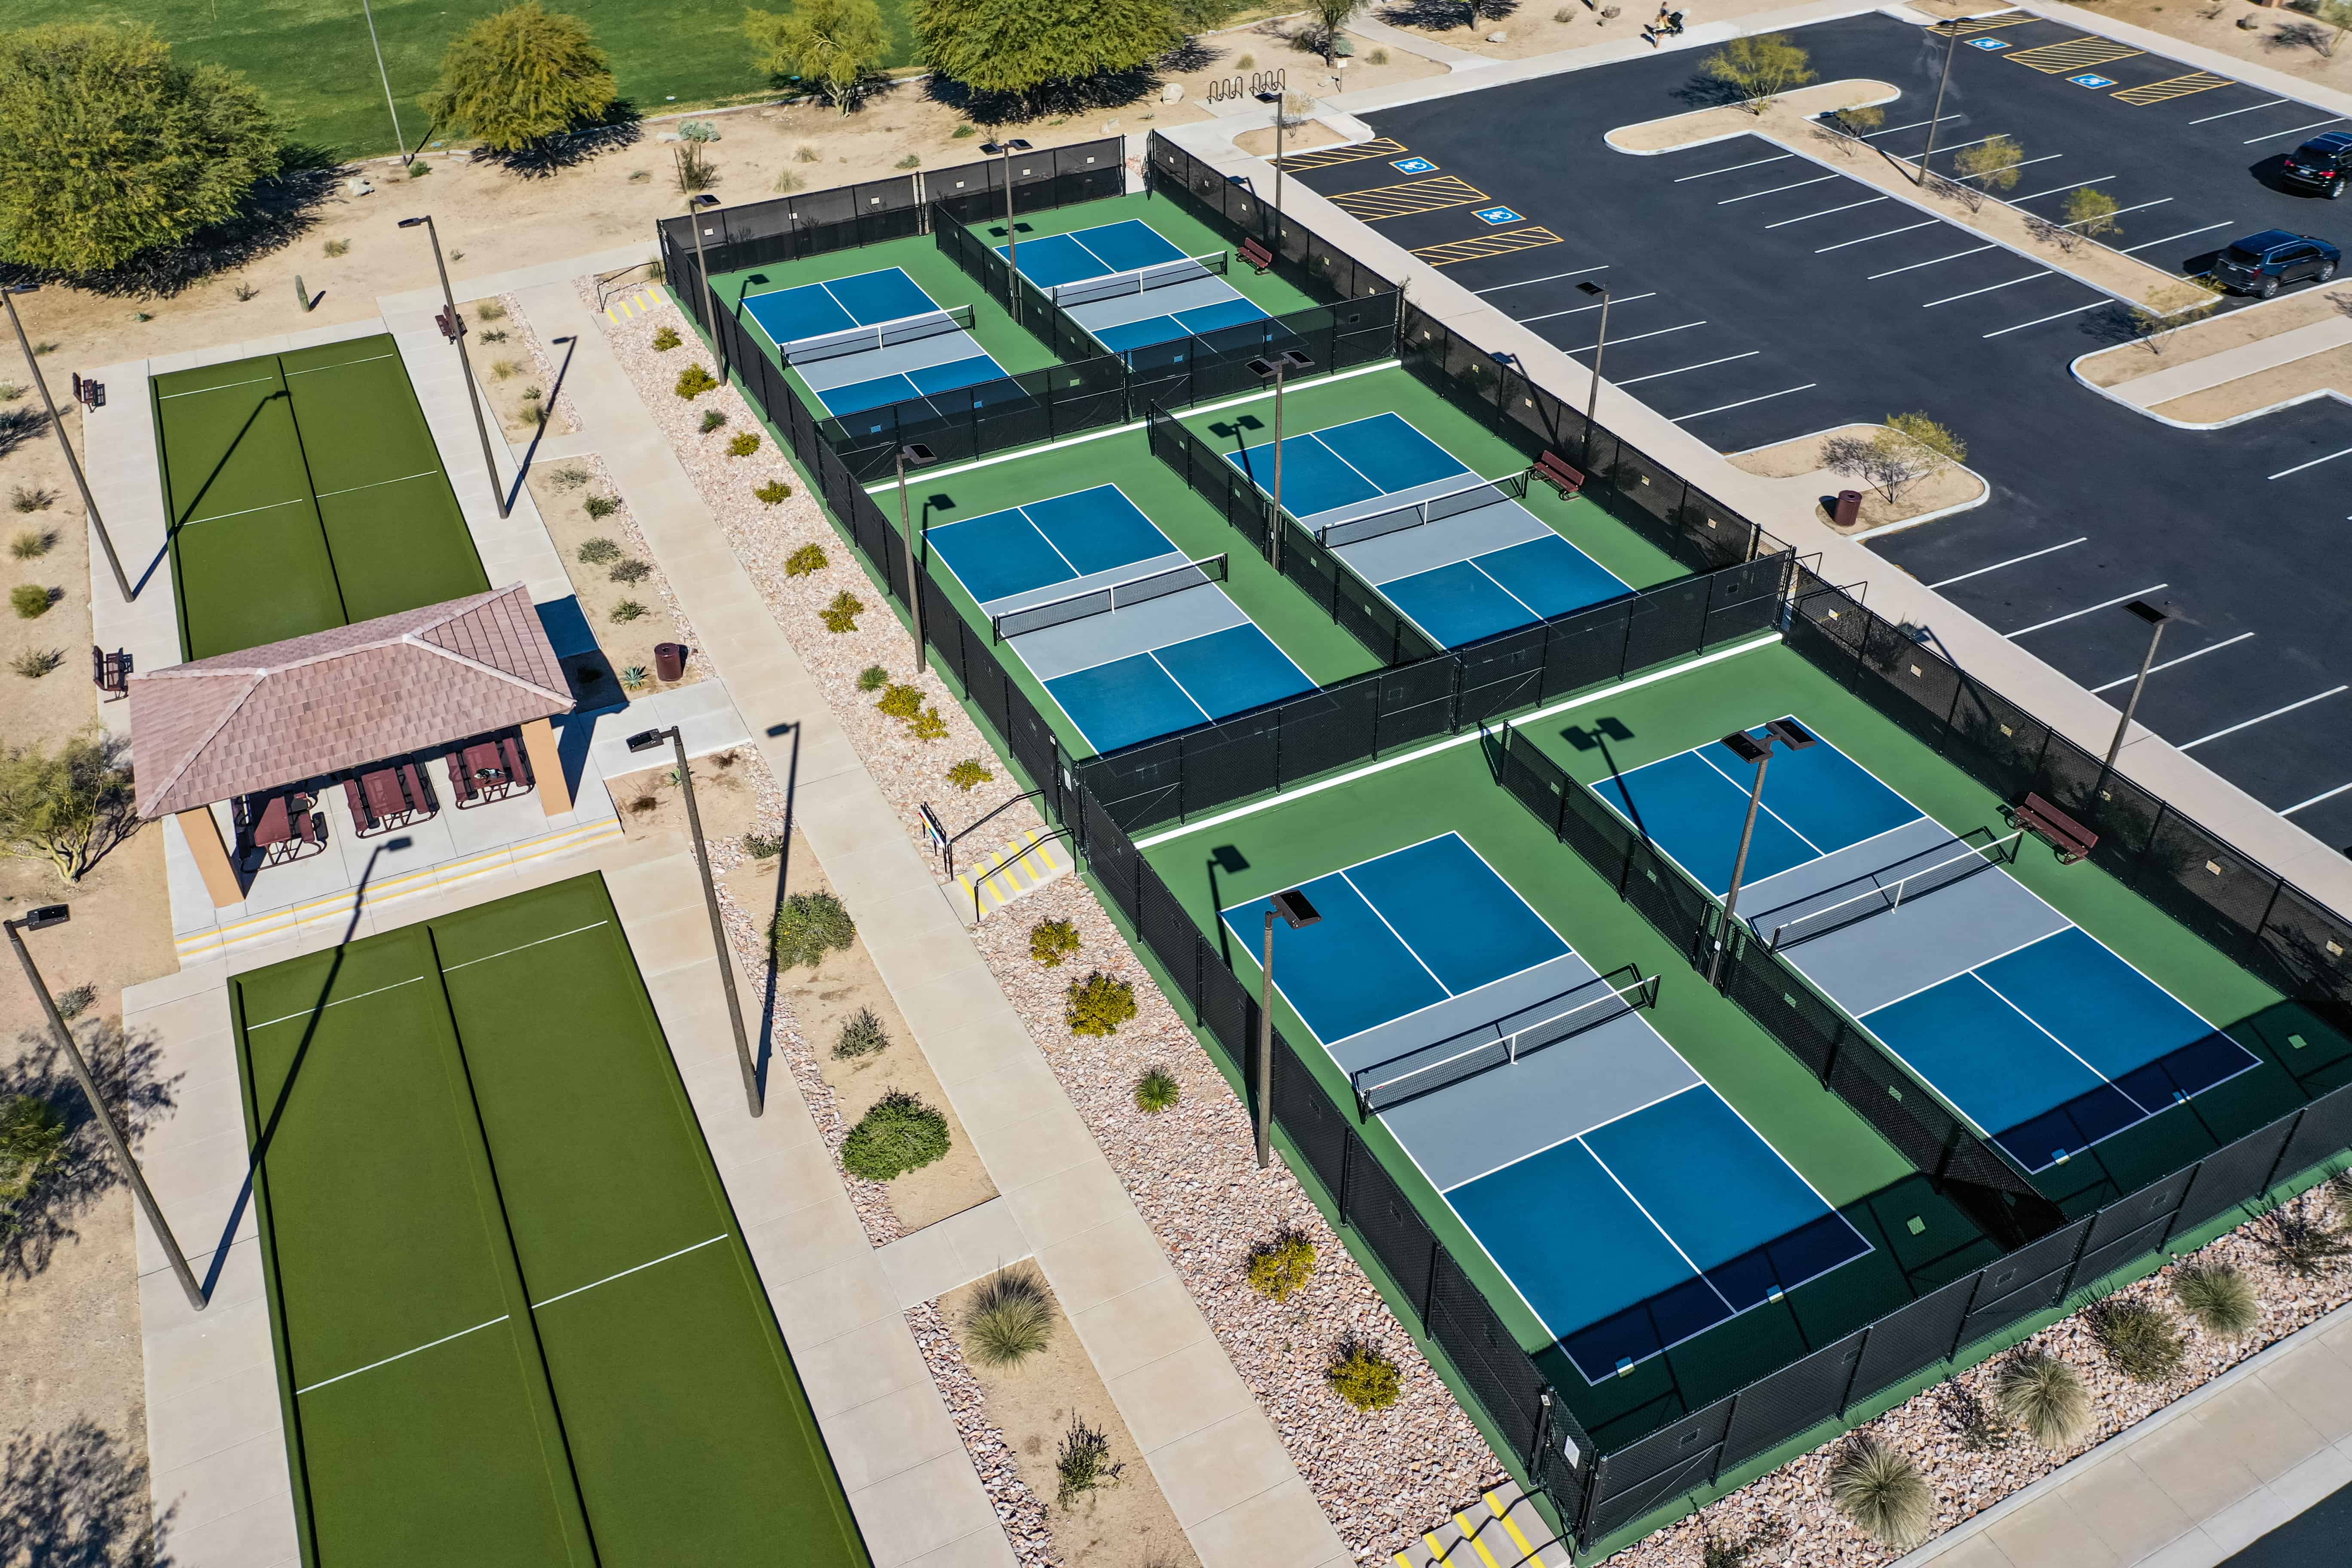 Business opportunity in the pickleball market